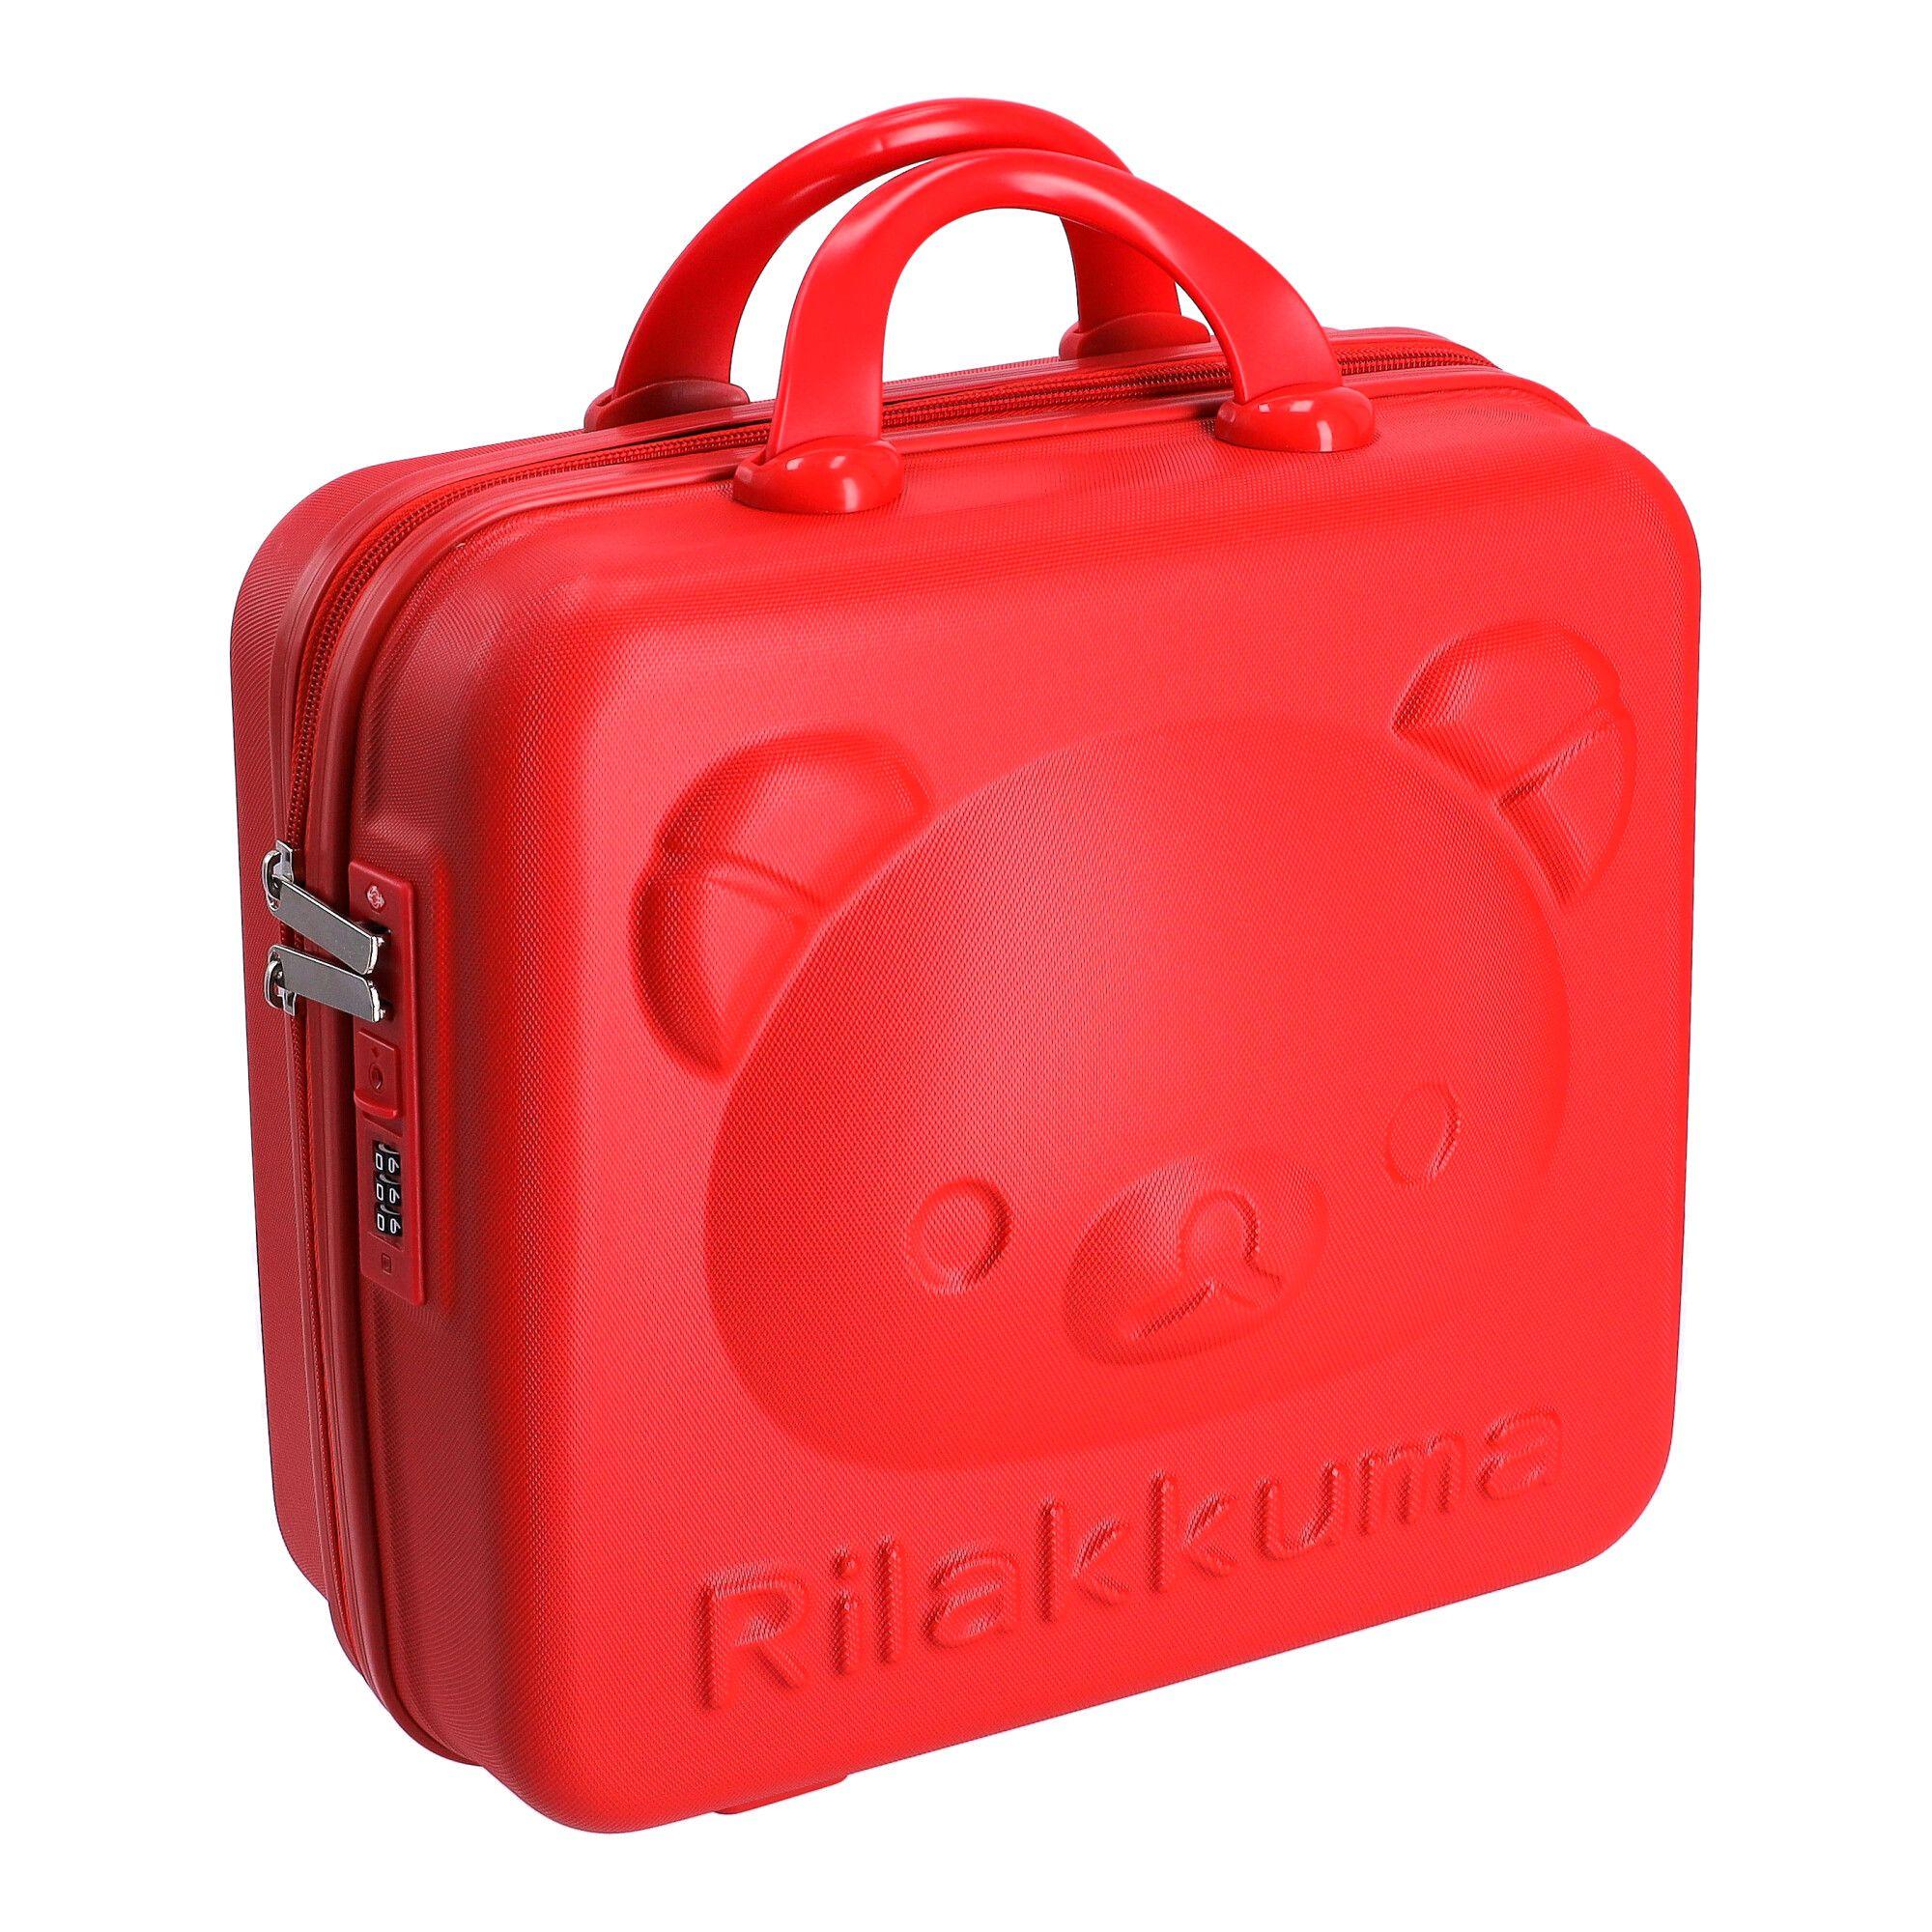 Children's luggage / Lovely travel cosmetic bag - red